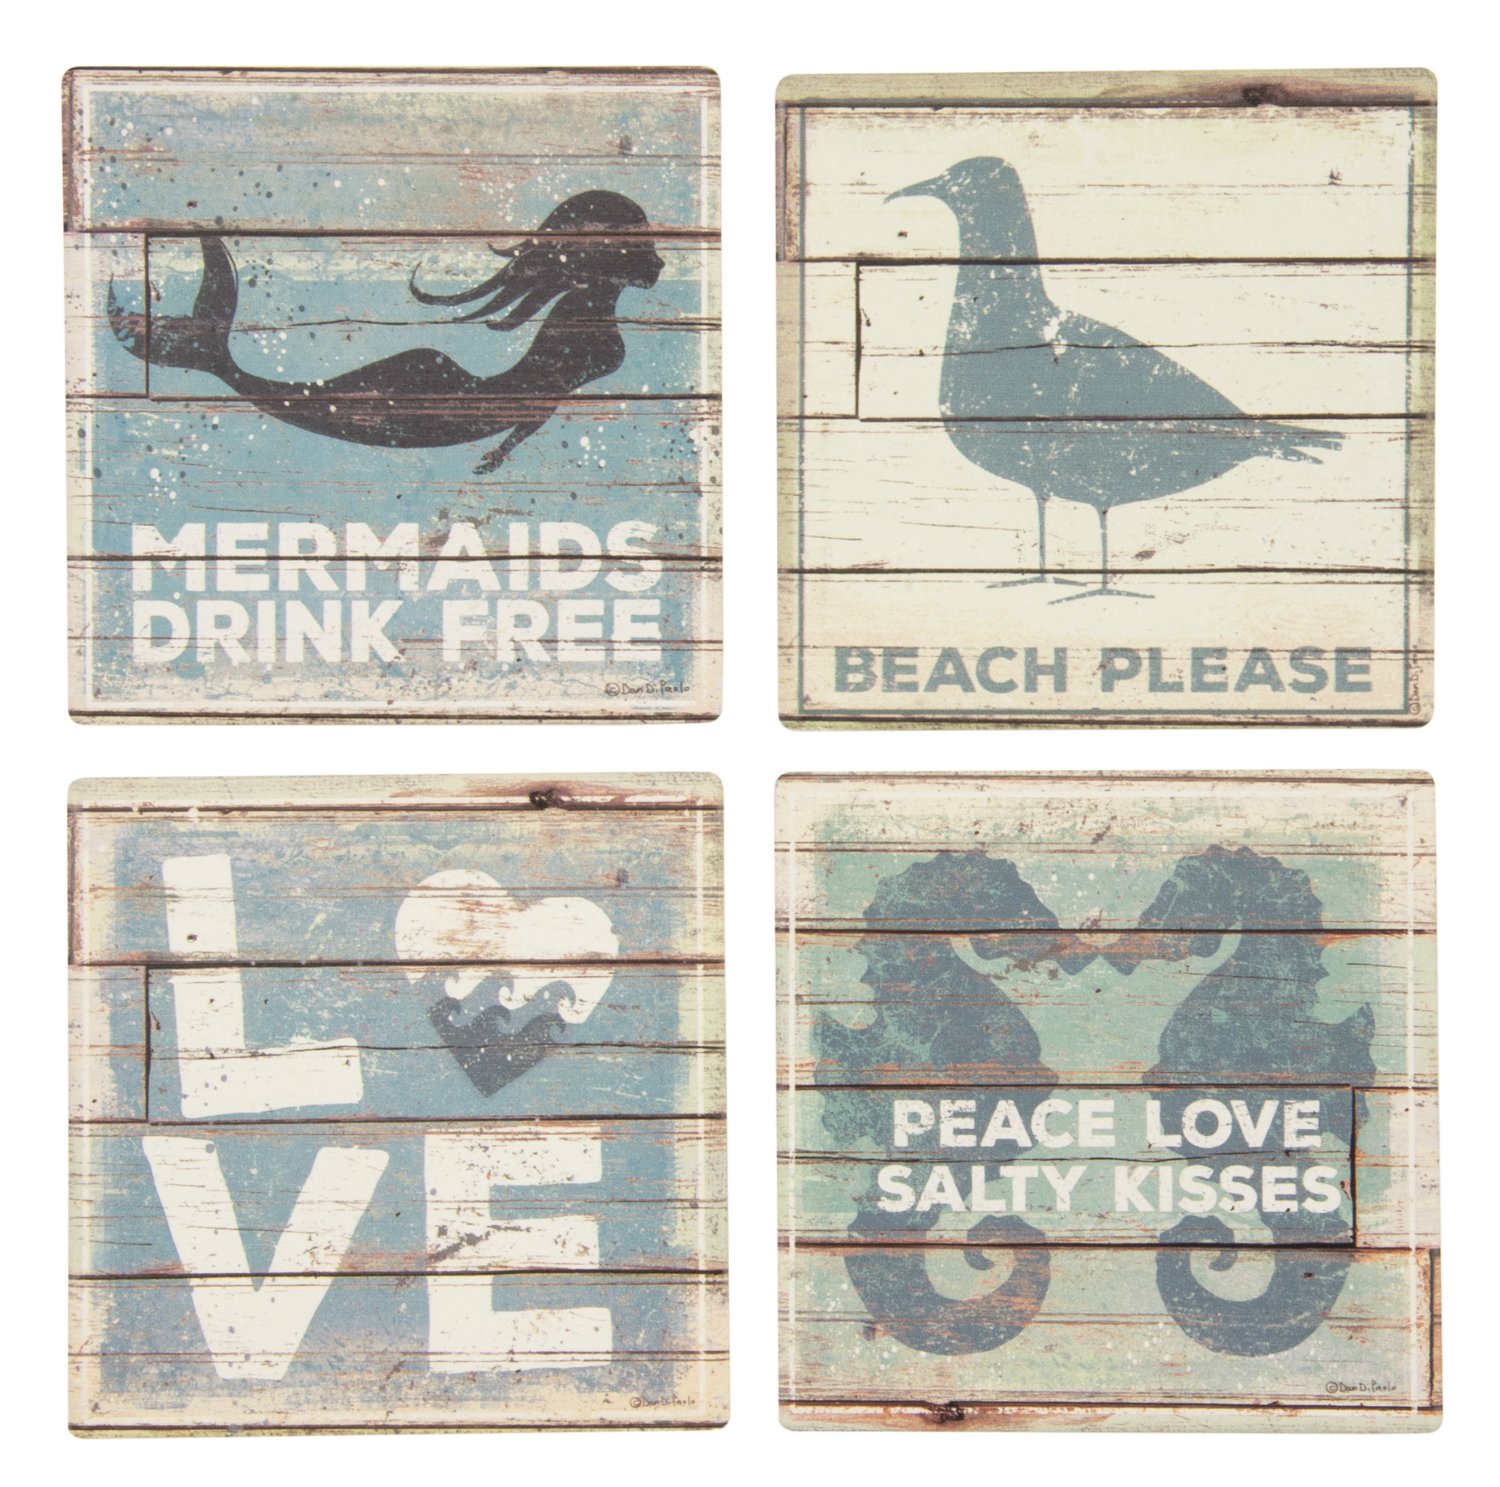 Primitives by Kathy 30899 Absorbent Stone Coaster Set, Beach